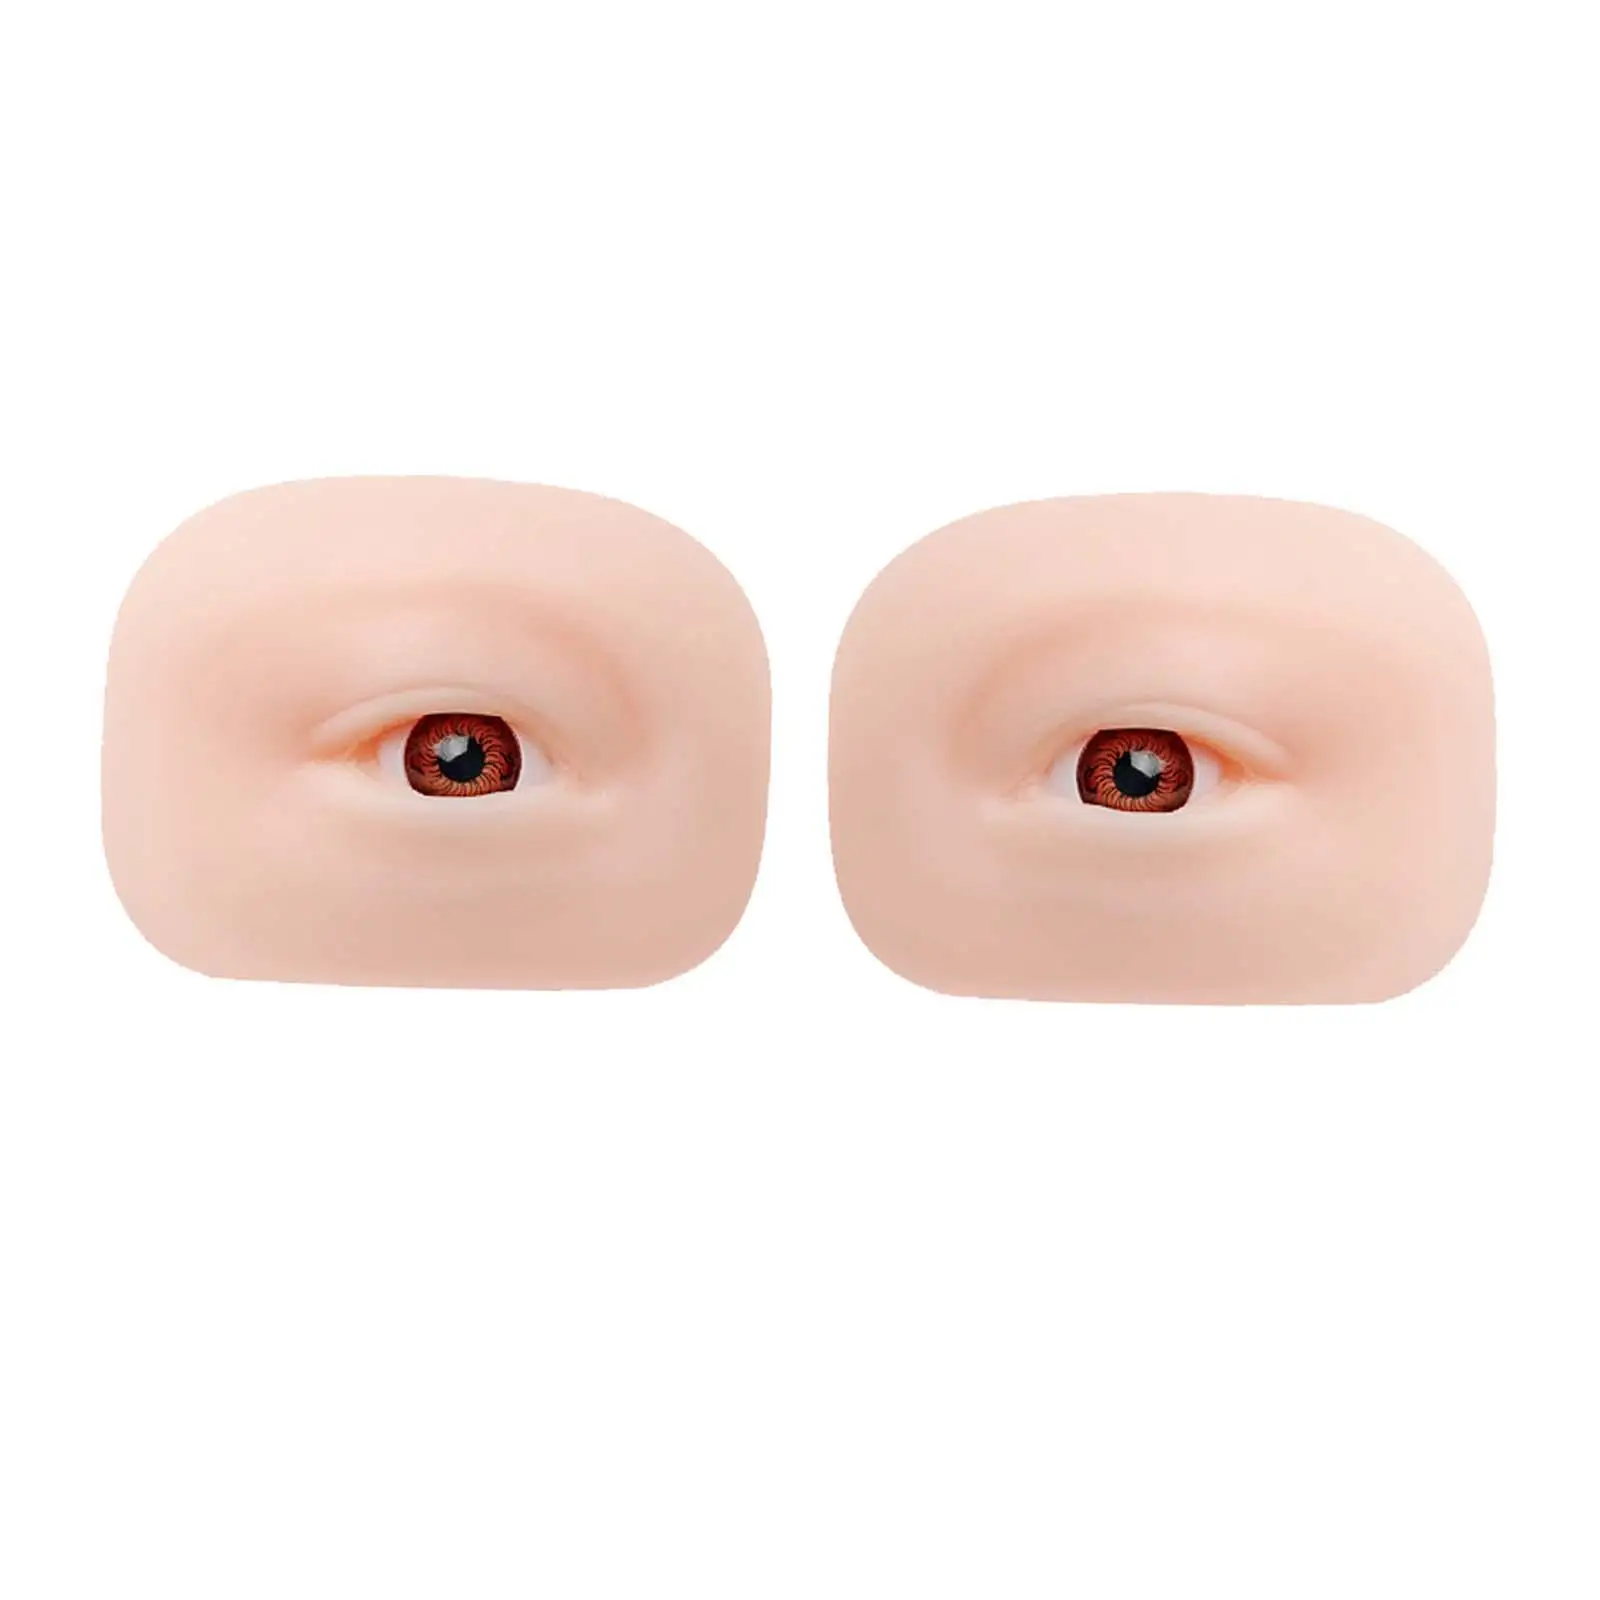 5D Silicone Eye Model Convenient Durable Makeup Mannequin Face Resuable for Beginners Makeup Training Beauticians Home Use